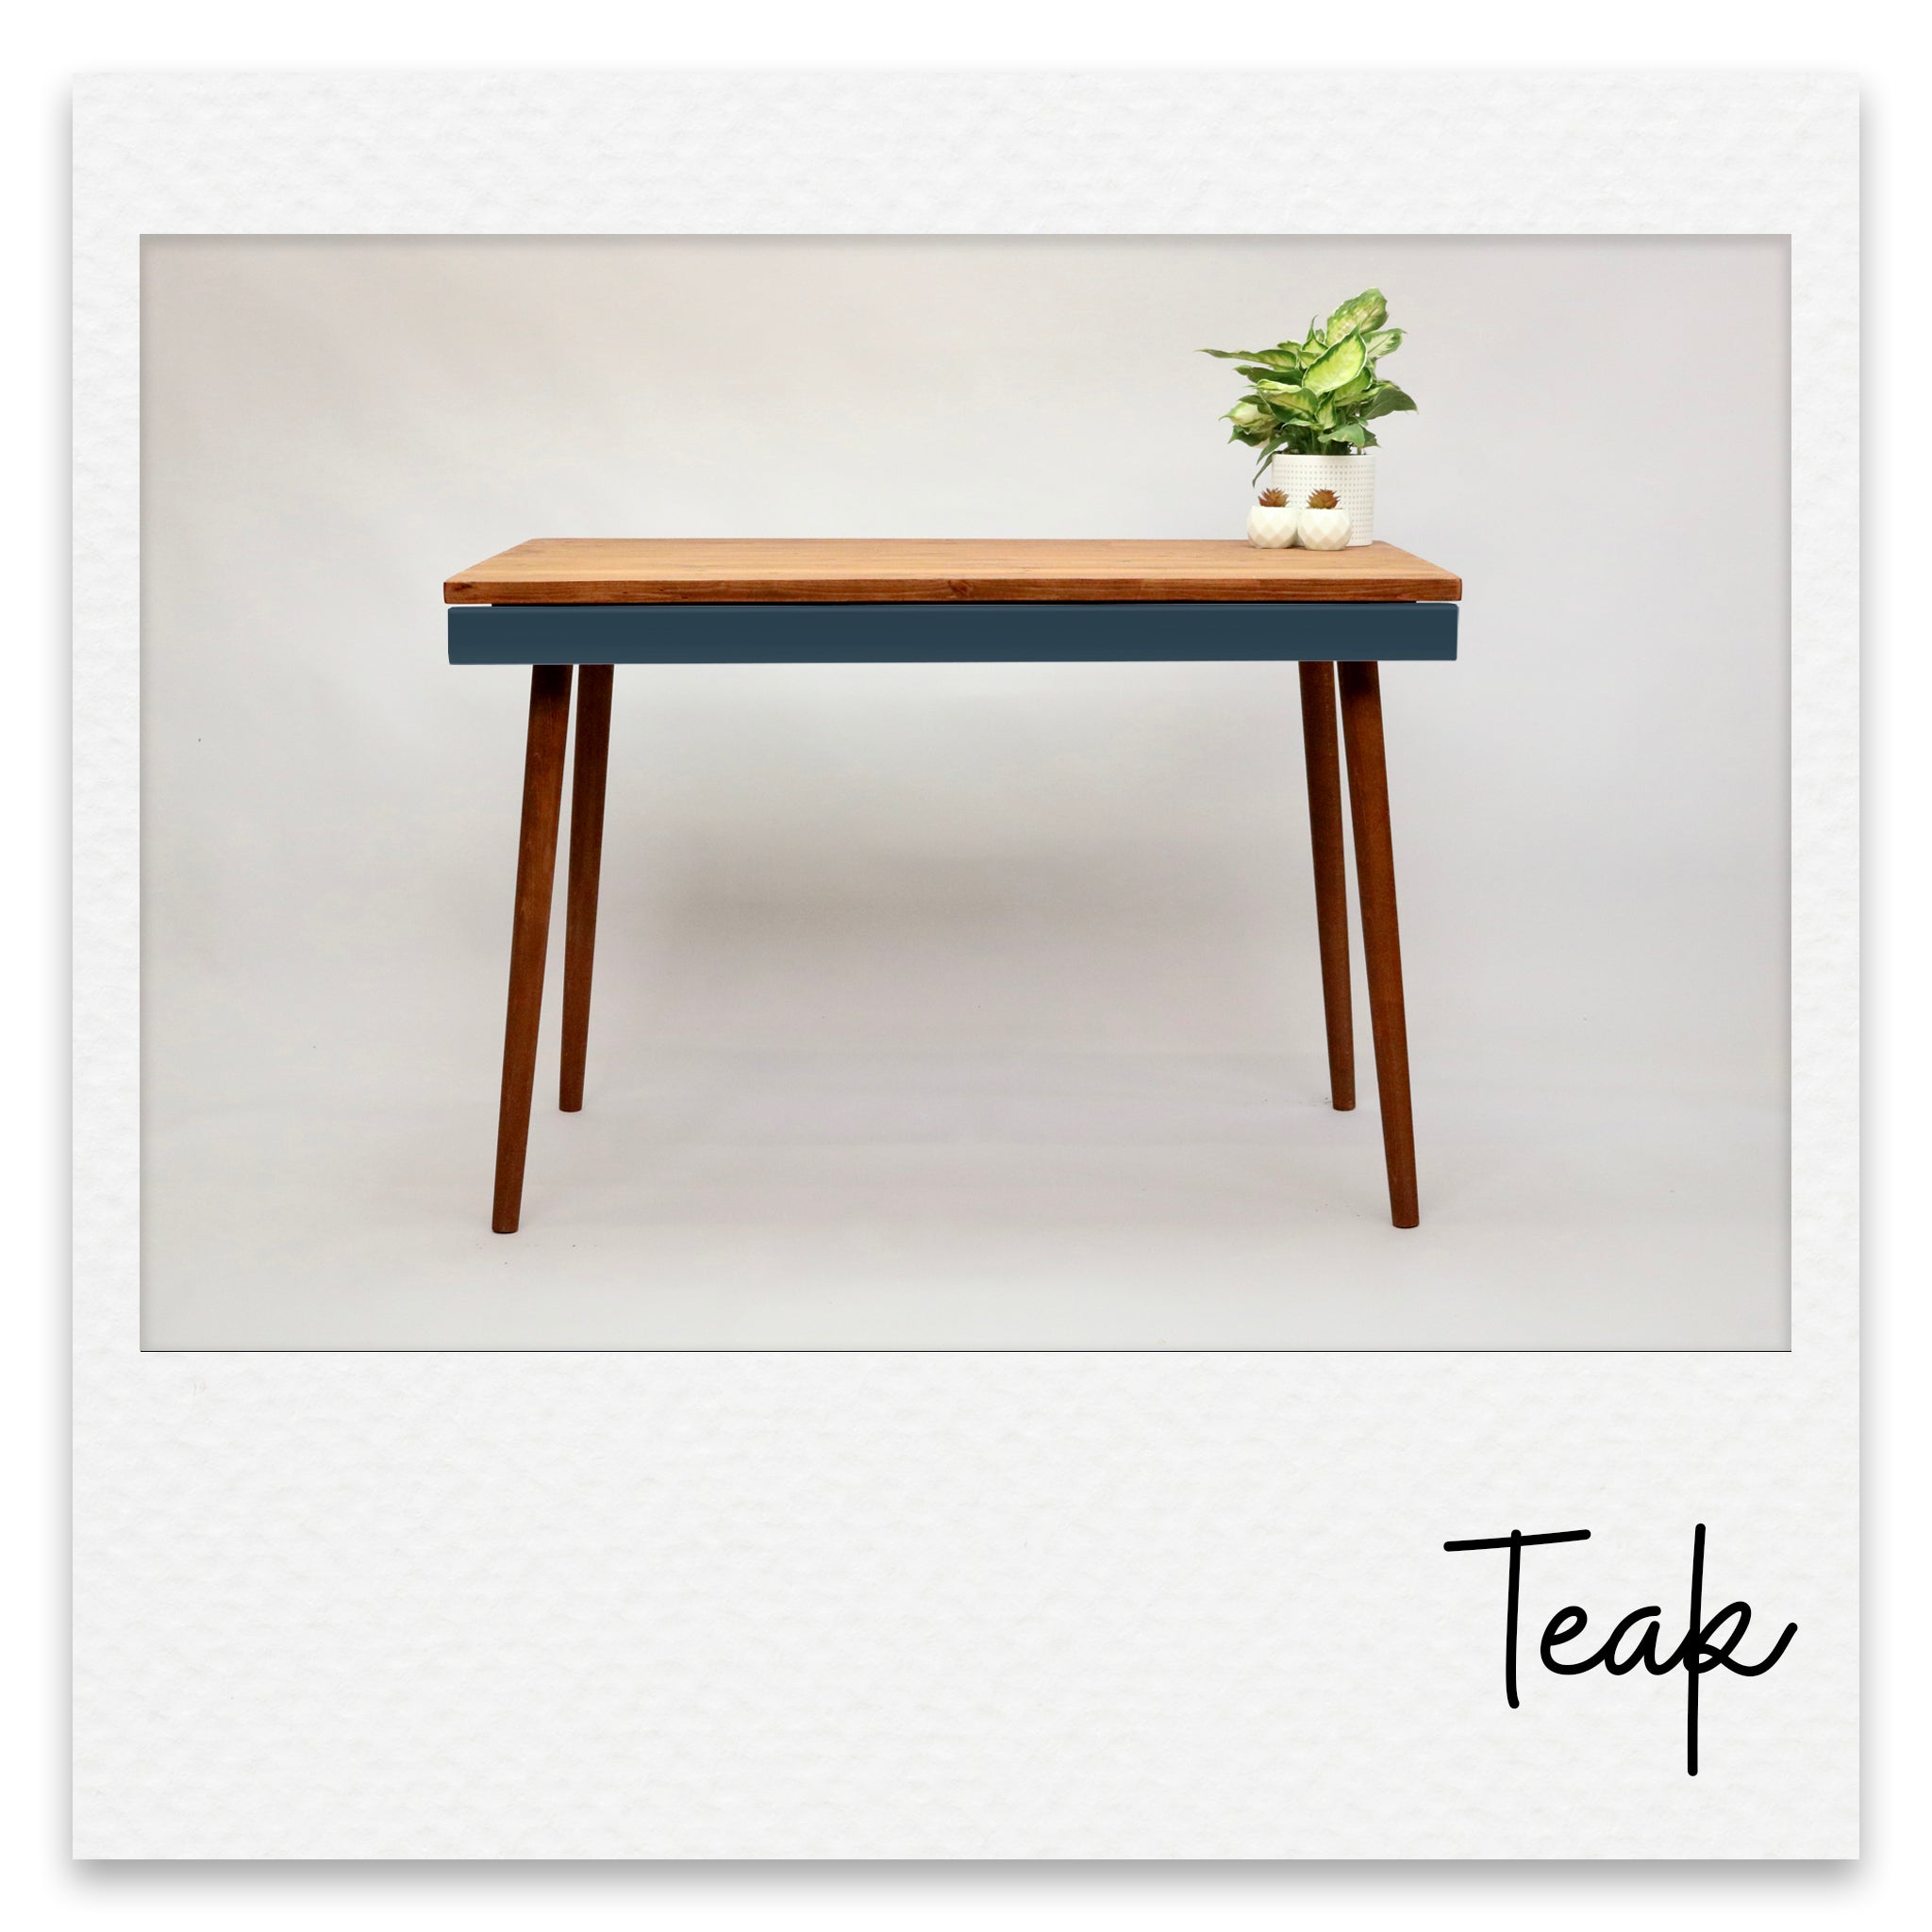 Scandinavian Simple Desk with Shallow Drawer and Painted Drawer Face - Jessica